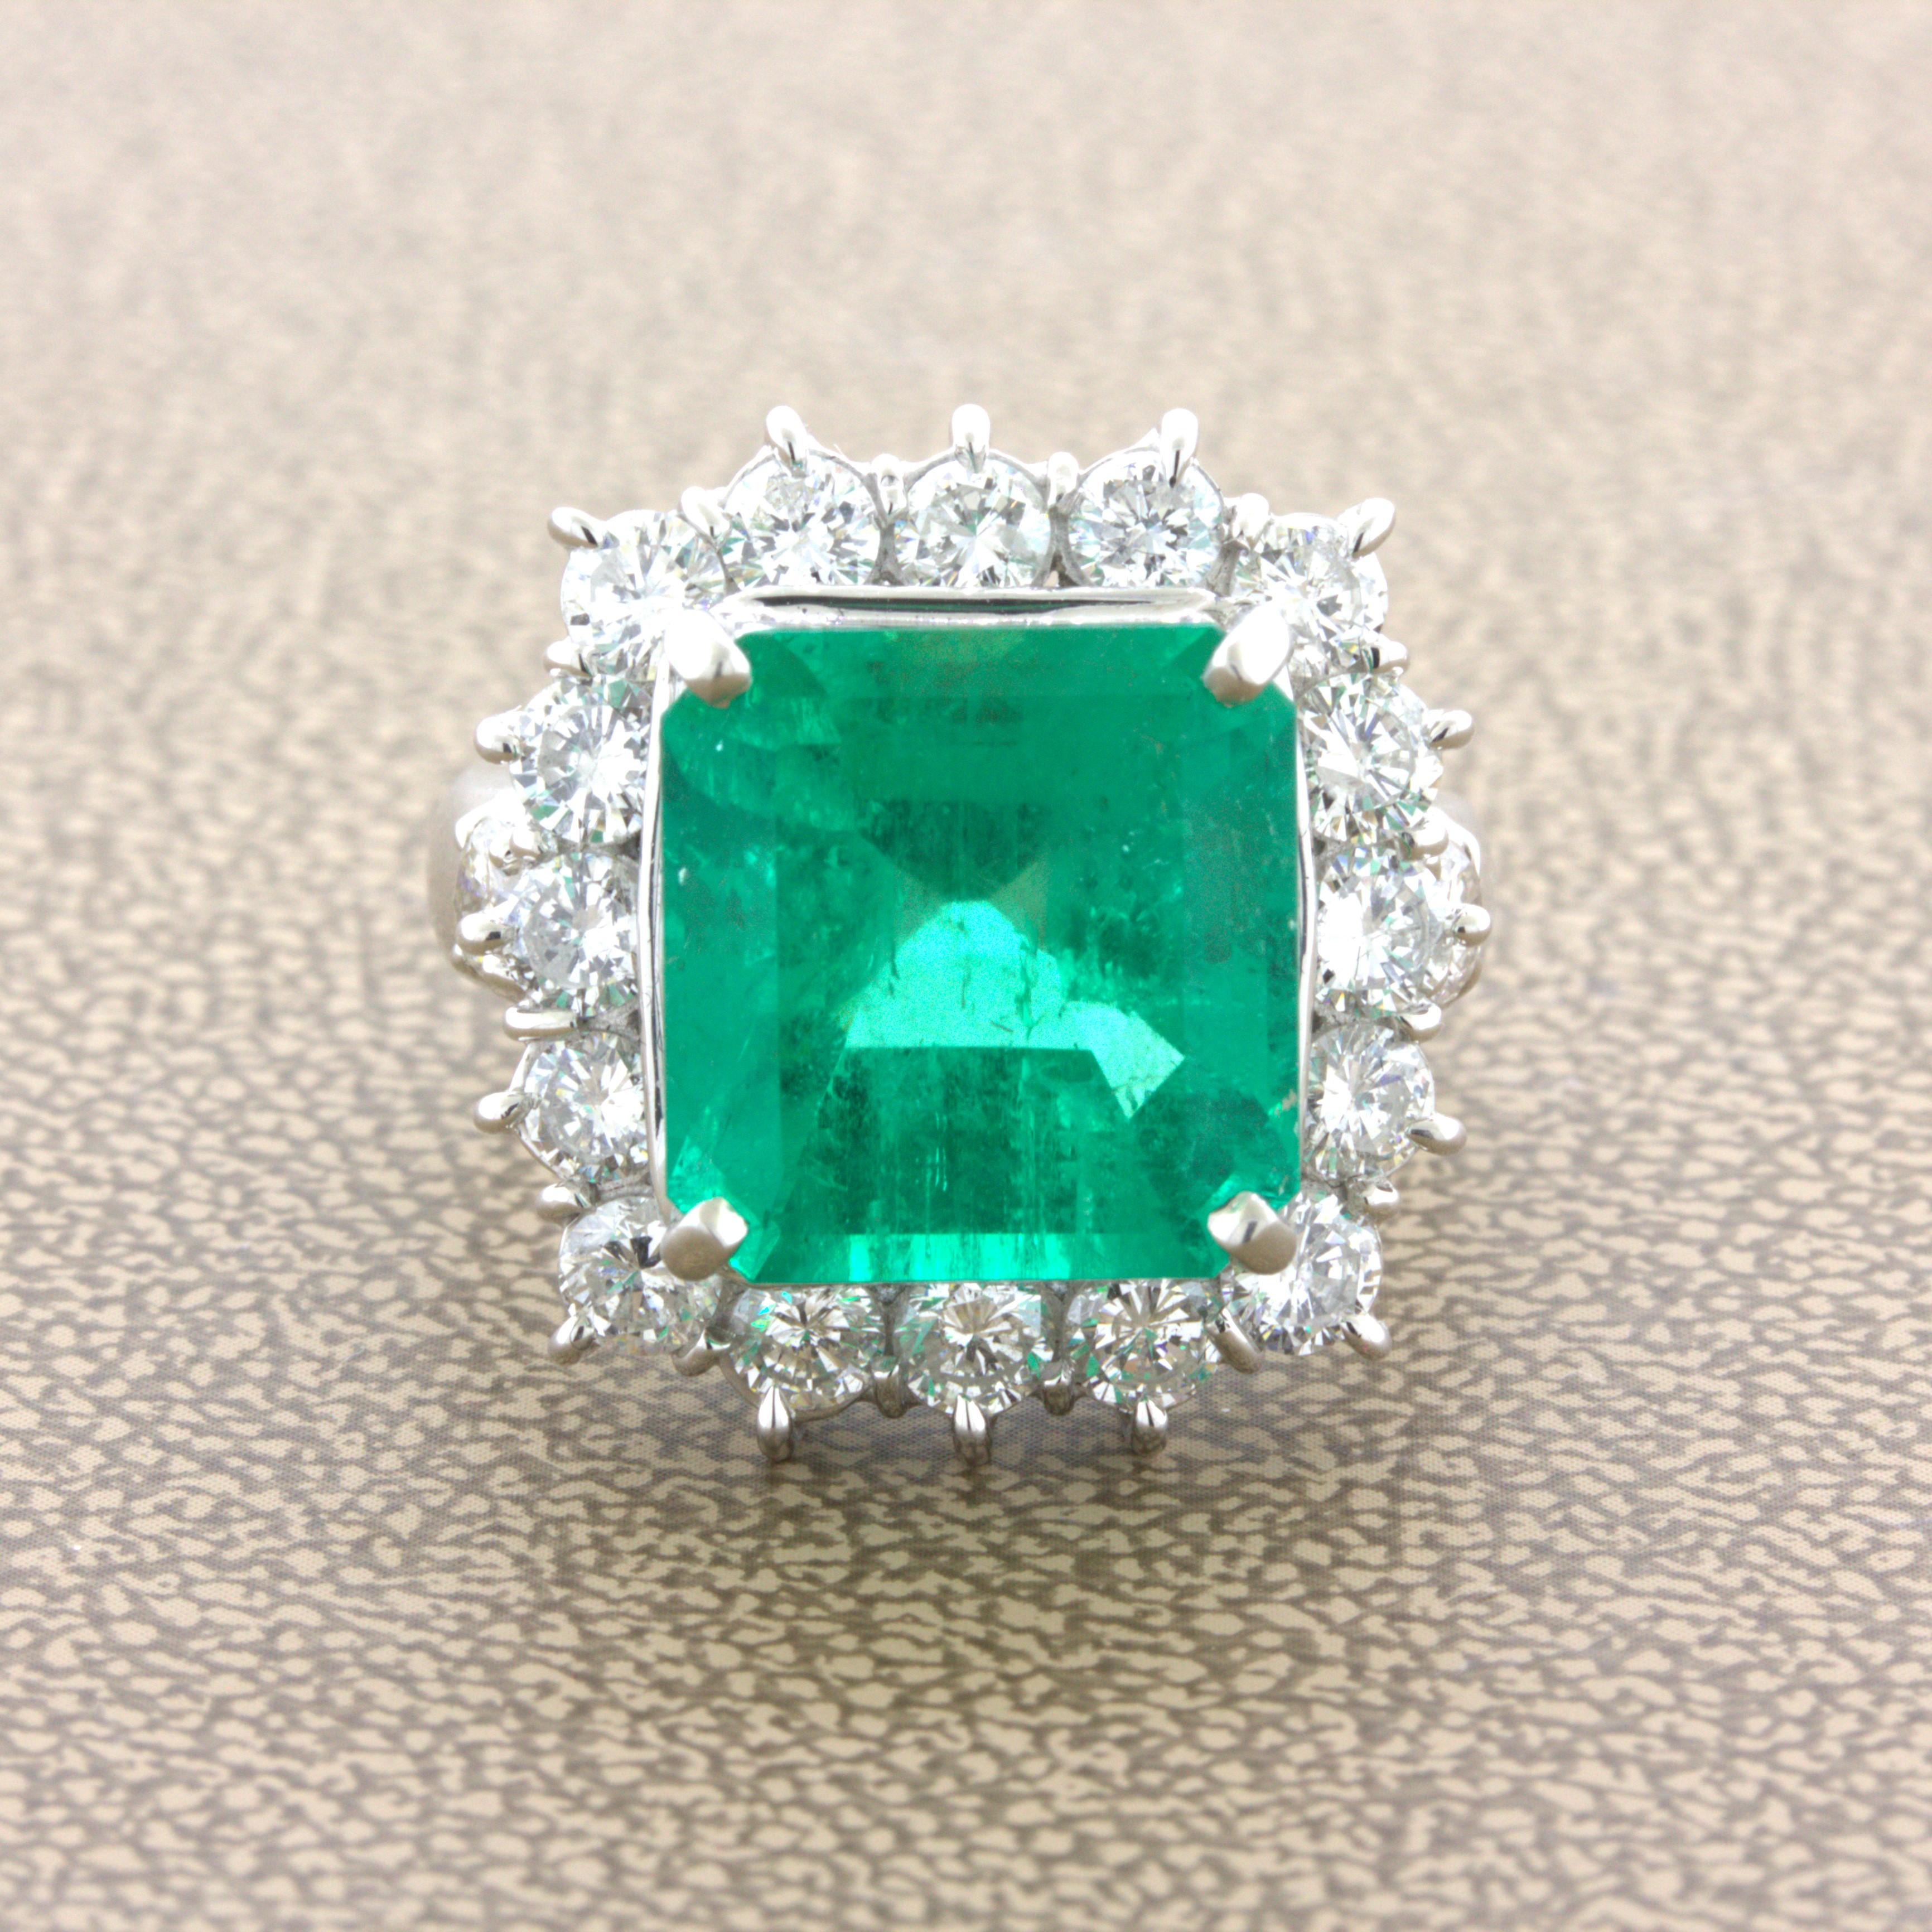 A very fine gem-quality GRS certified Colombian emerald takes center stage. It weighs an impressive 7.60 carats and has the ideal intense glass green color with excellent brightness allowing the stone to glow in the light. It is complemented by a